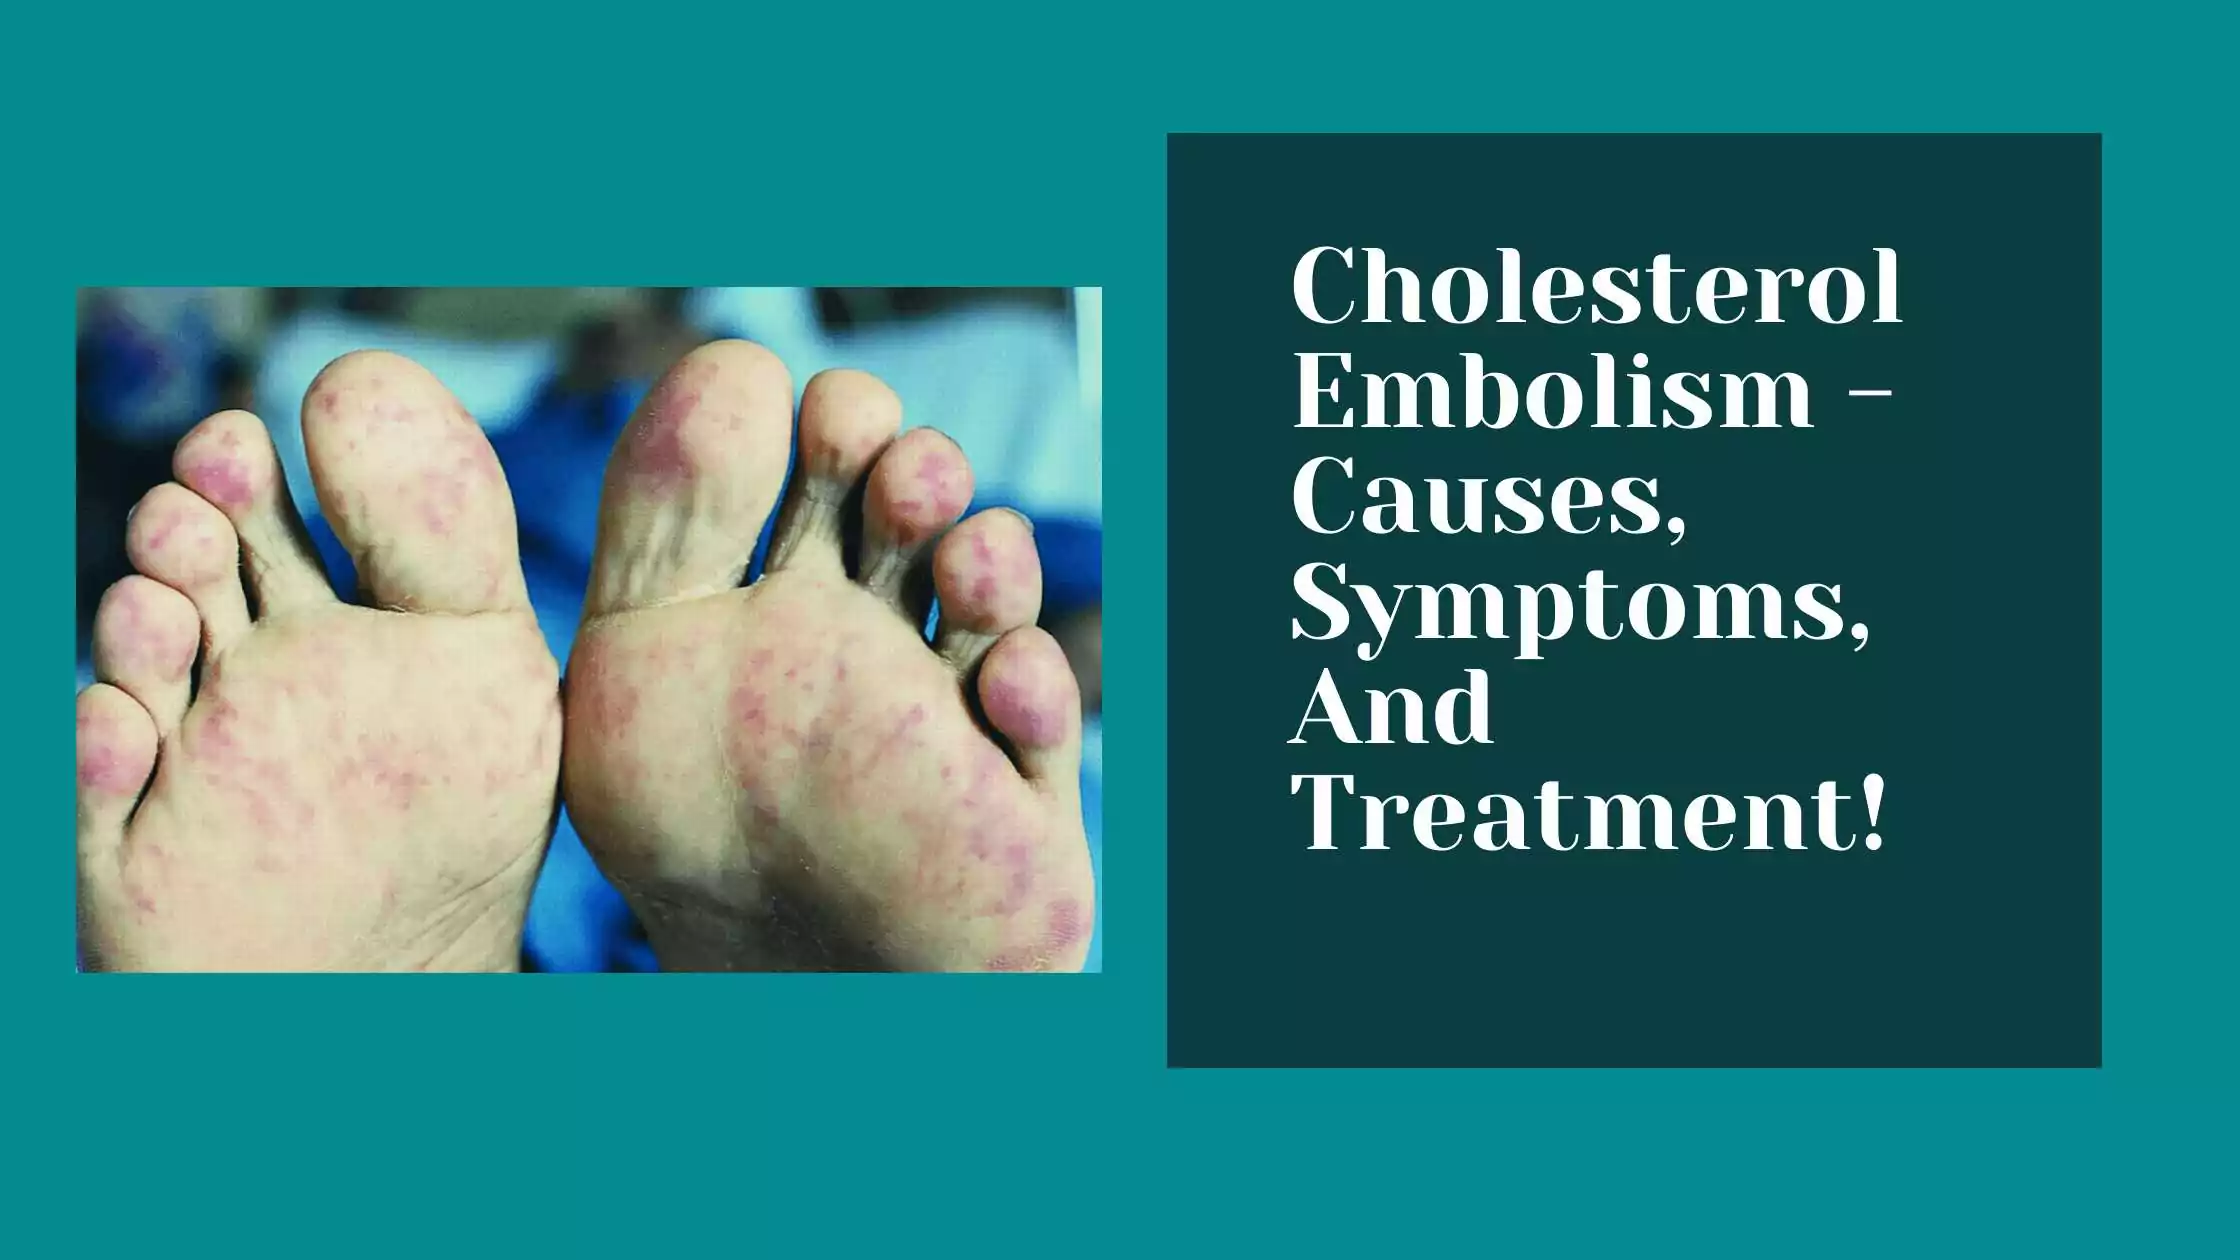 Cholesterol Embolism - Causes, Symptoms, And Treatment!